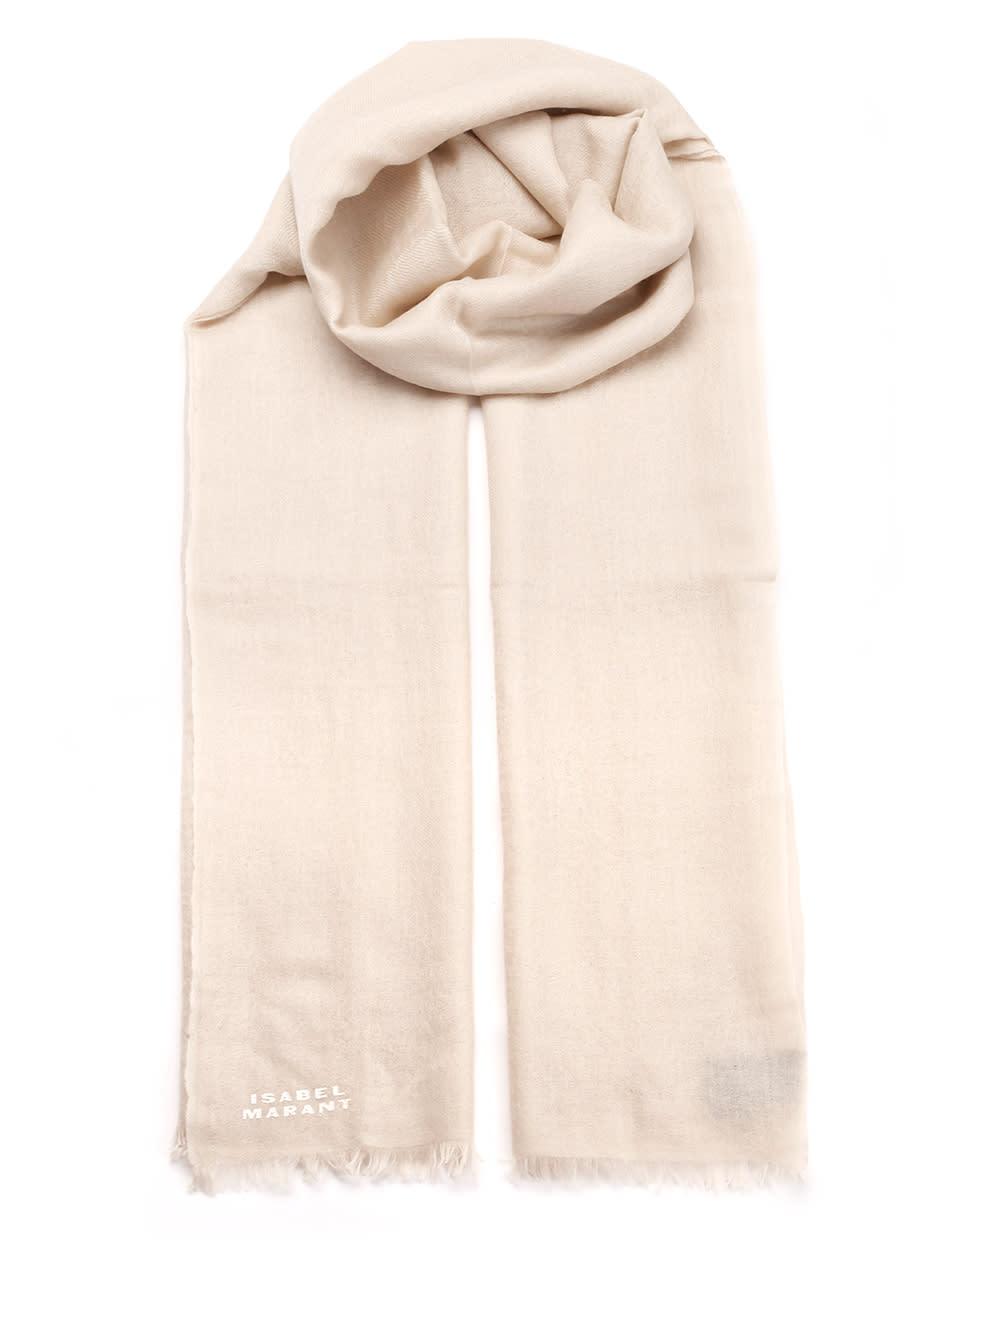 Isabel Marant Cashmere Scarf in Natural | Lyst